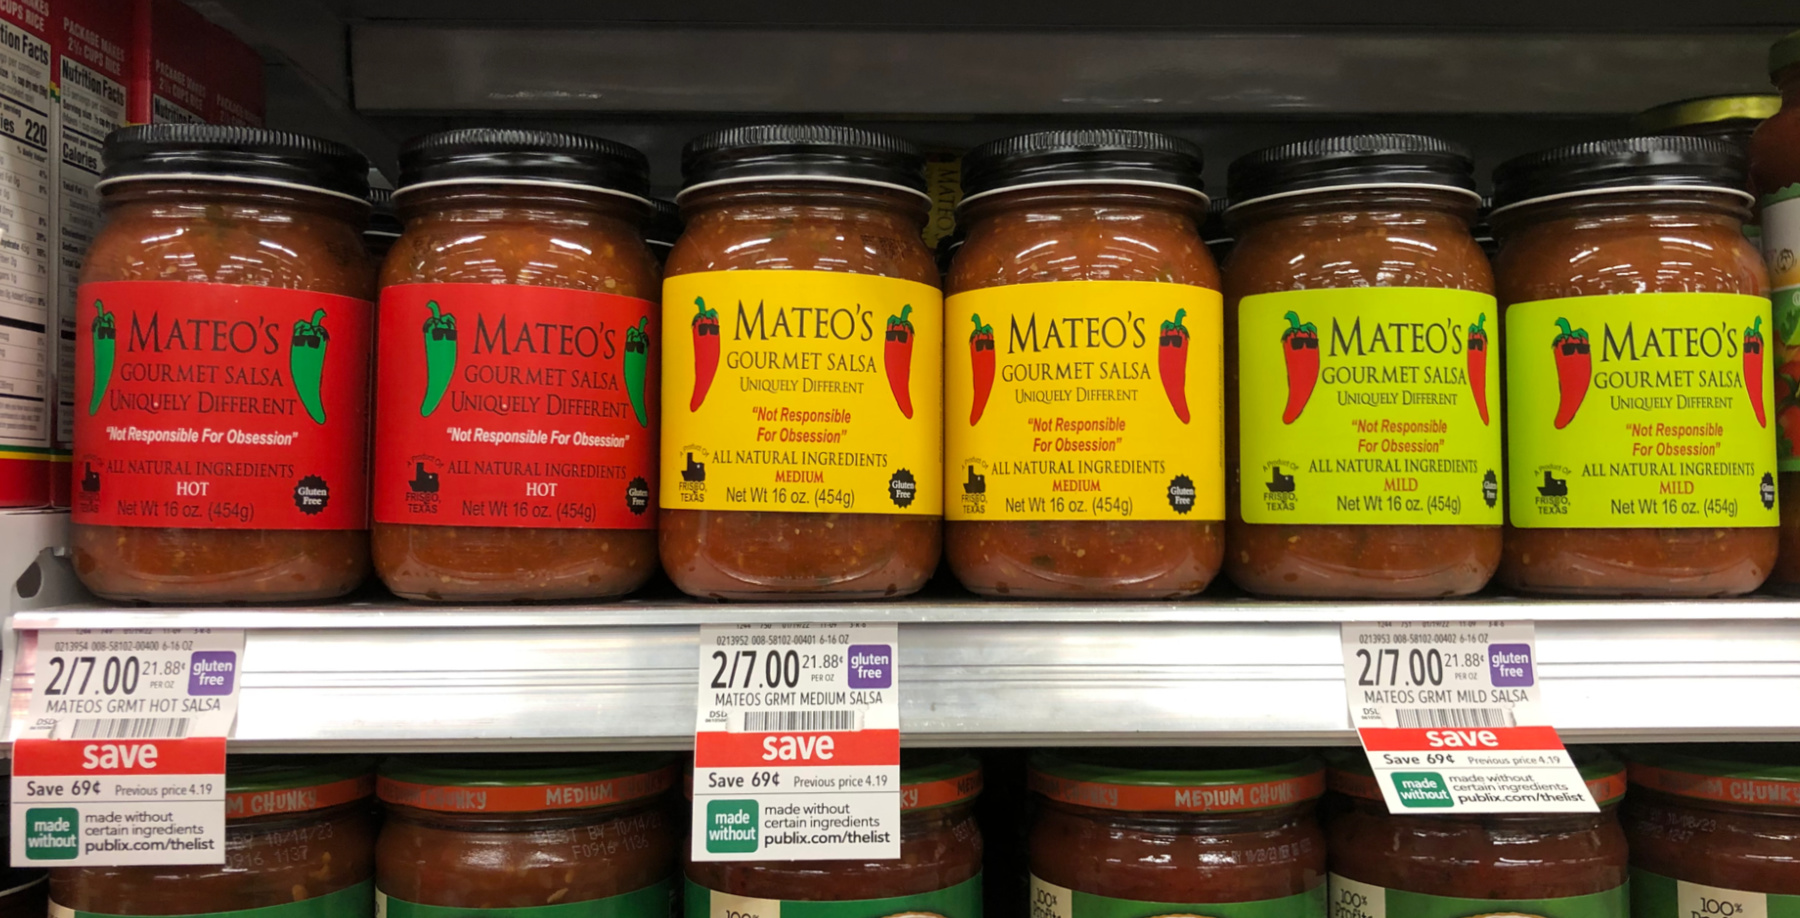 Mateo's Gourmet Salsa Is On Sale NOW At Publix - Pick Up Your New Favorite Salsa & Save! on I Heart Publix